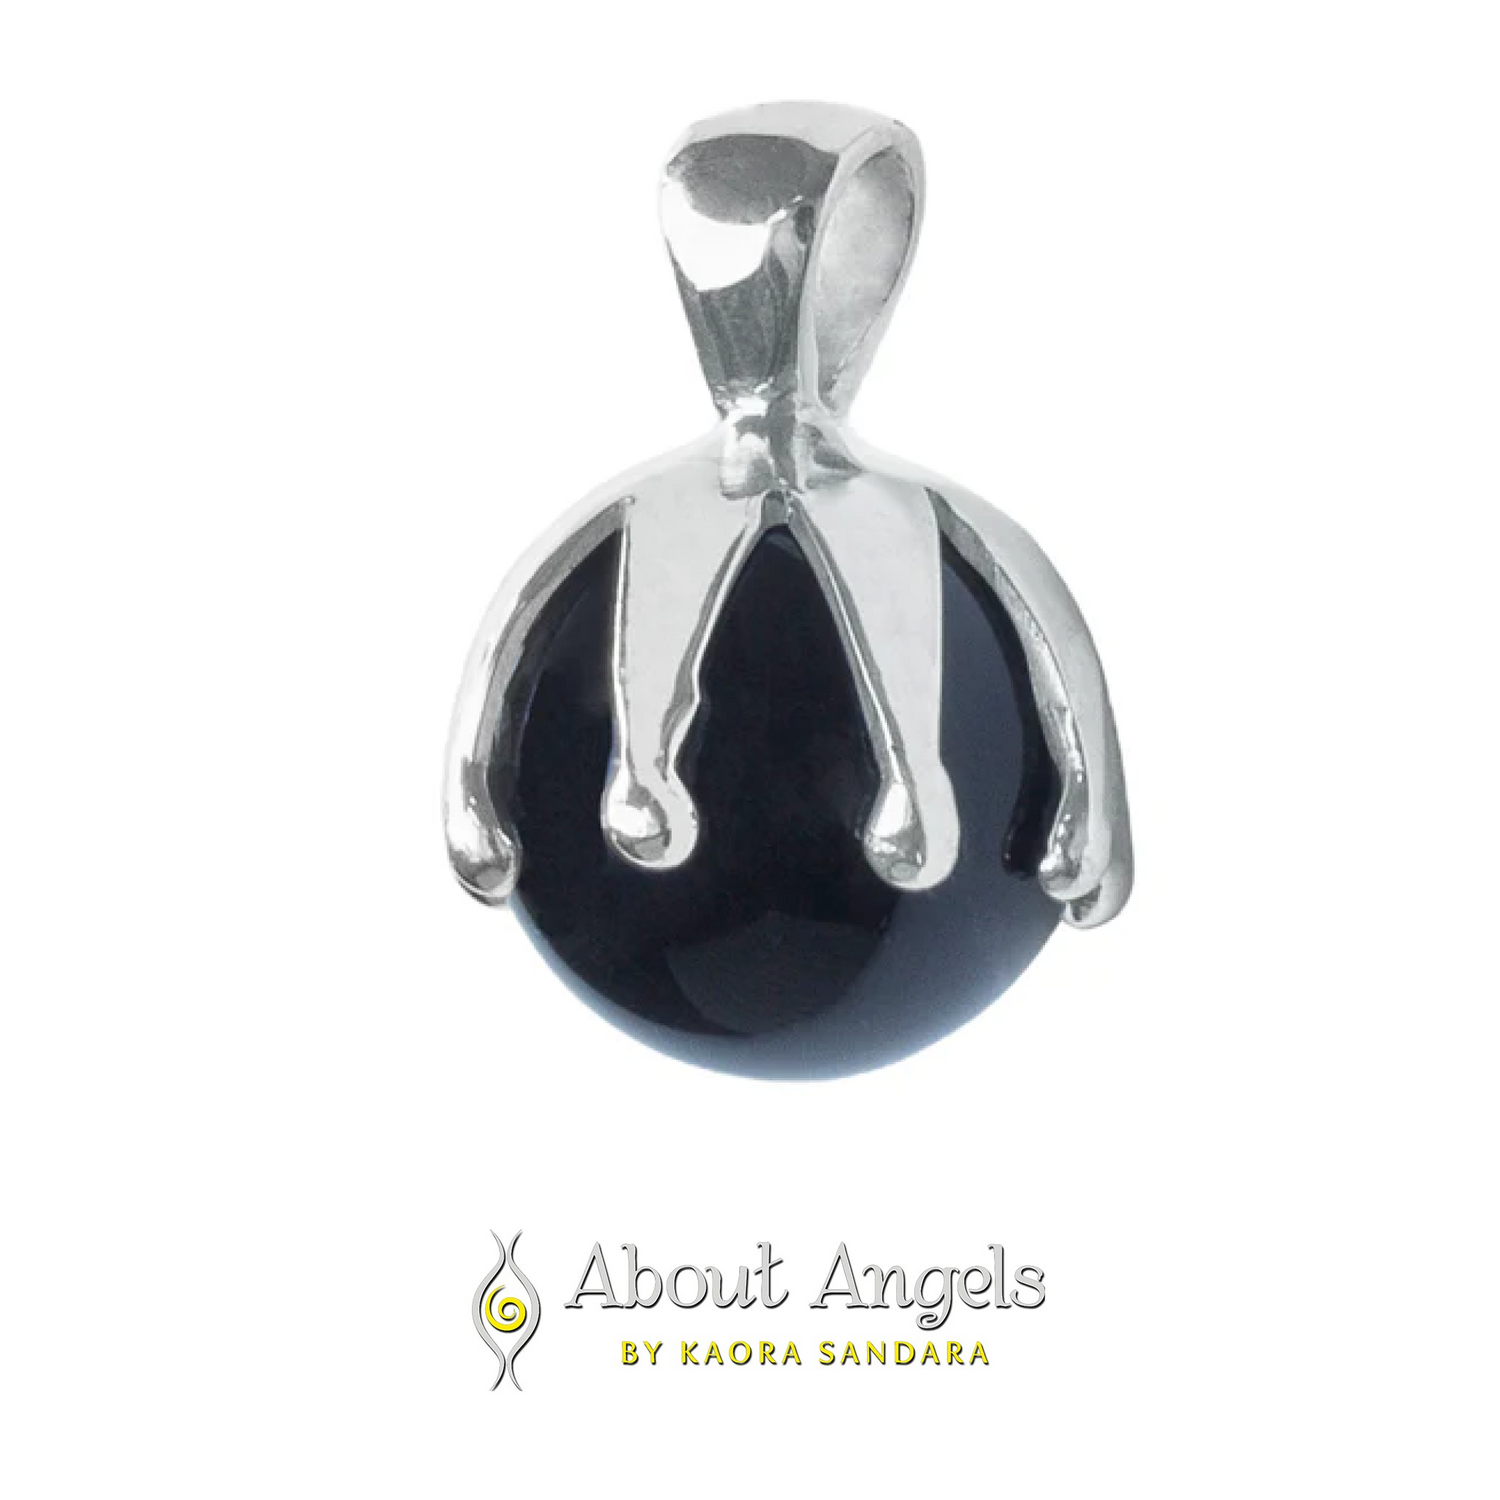 Shop our luxurious pendant, featuring an exquisite black agate design. I'M A Queen provides extravagance and royalty that reflects your inner queen.